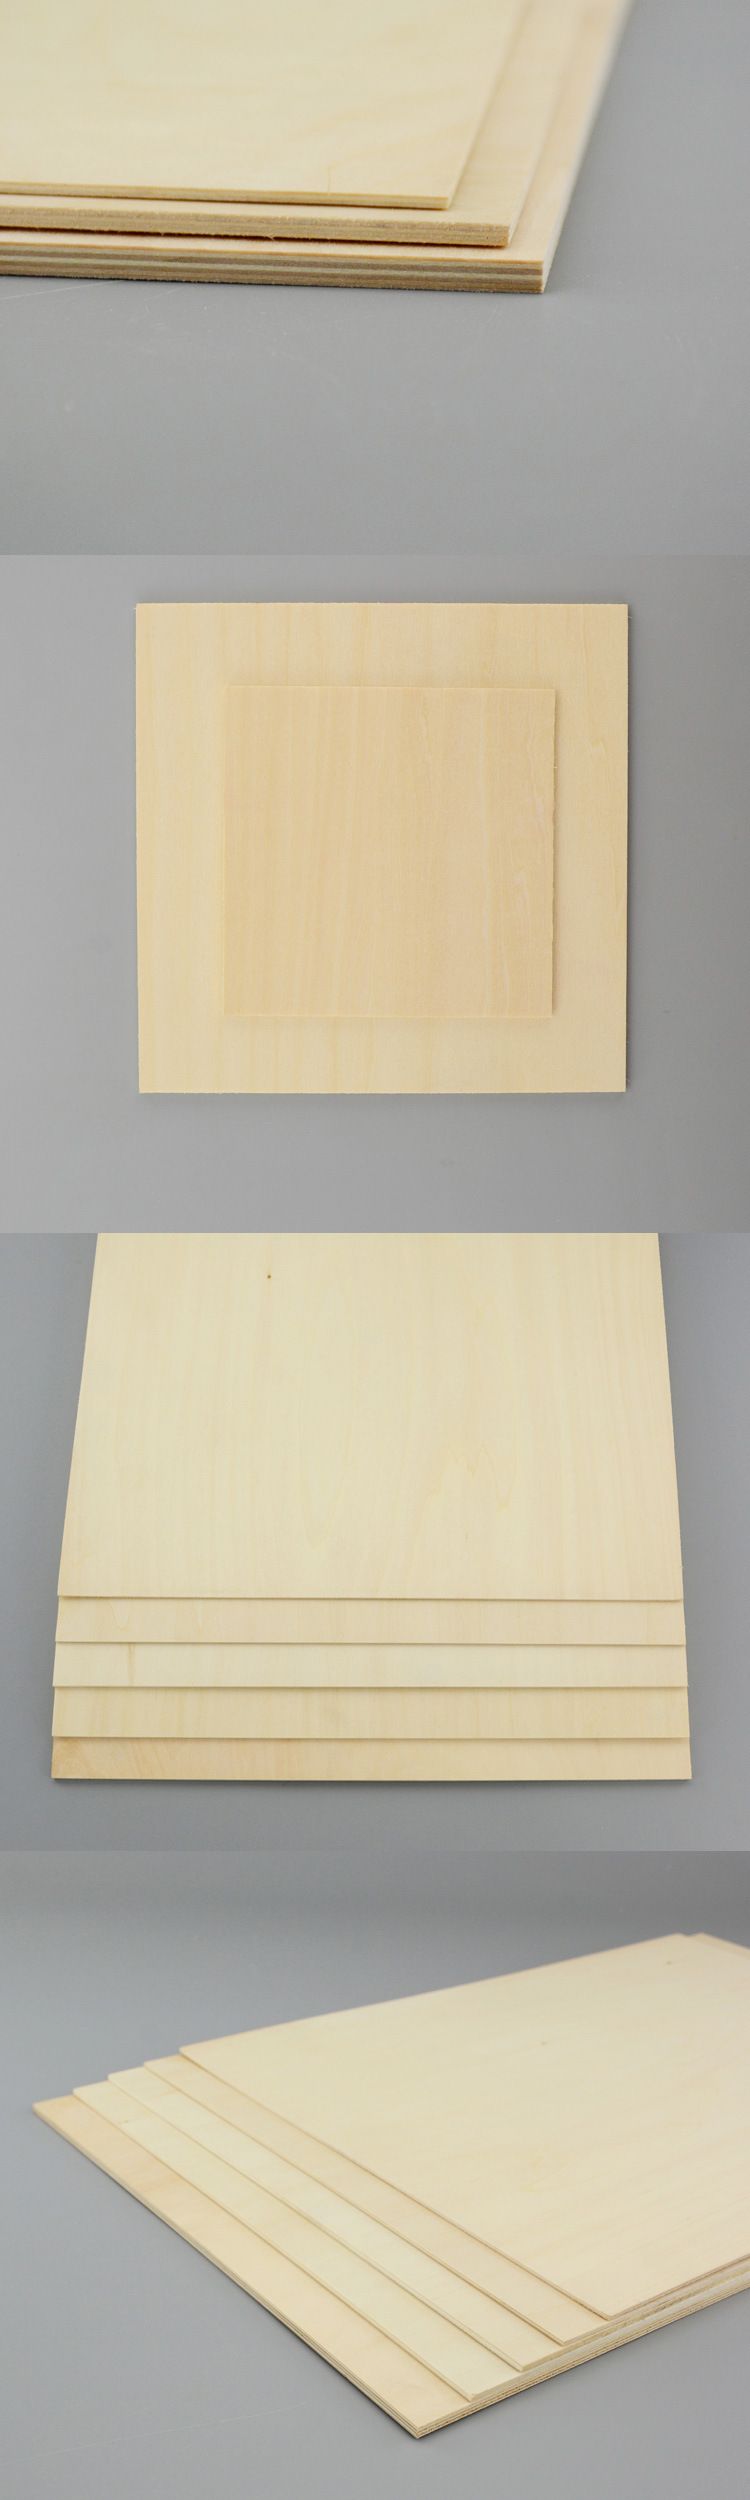 4-Sizes-10Pcs-Basswood-Wood-Sheet-3-Layer-Laminated-Board-Laser-Engraving-DIY-Model-Building-House-A-1374249